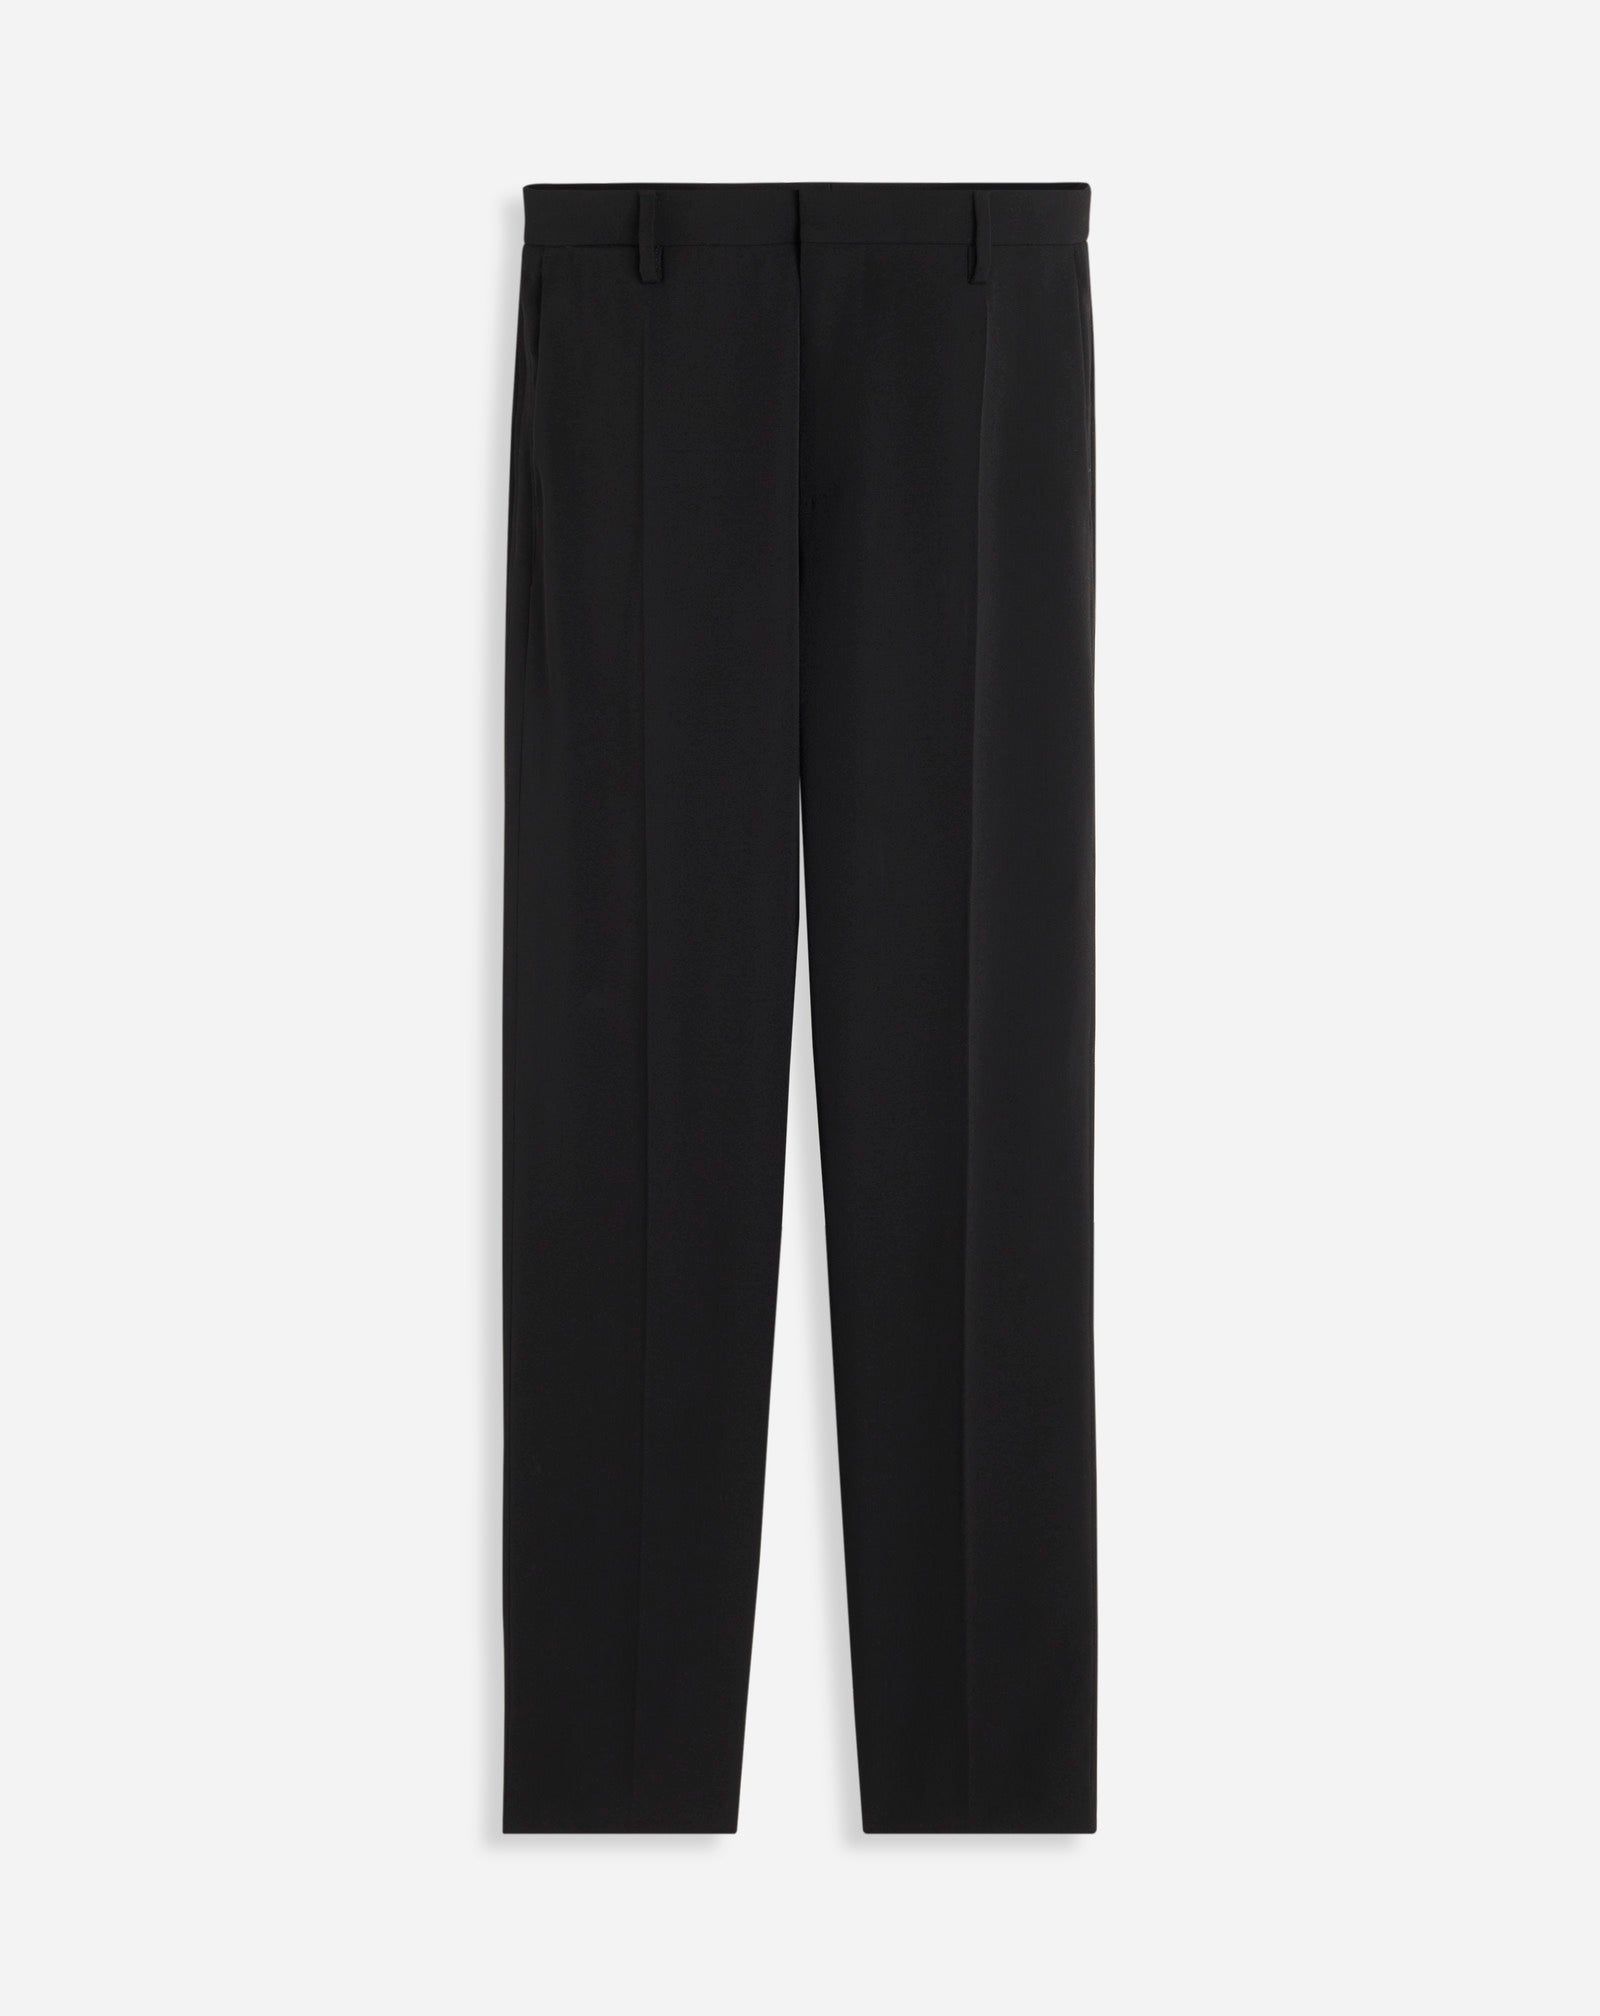 Black Cropped Cigarette Trousers